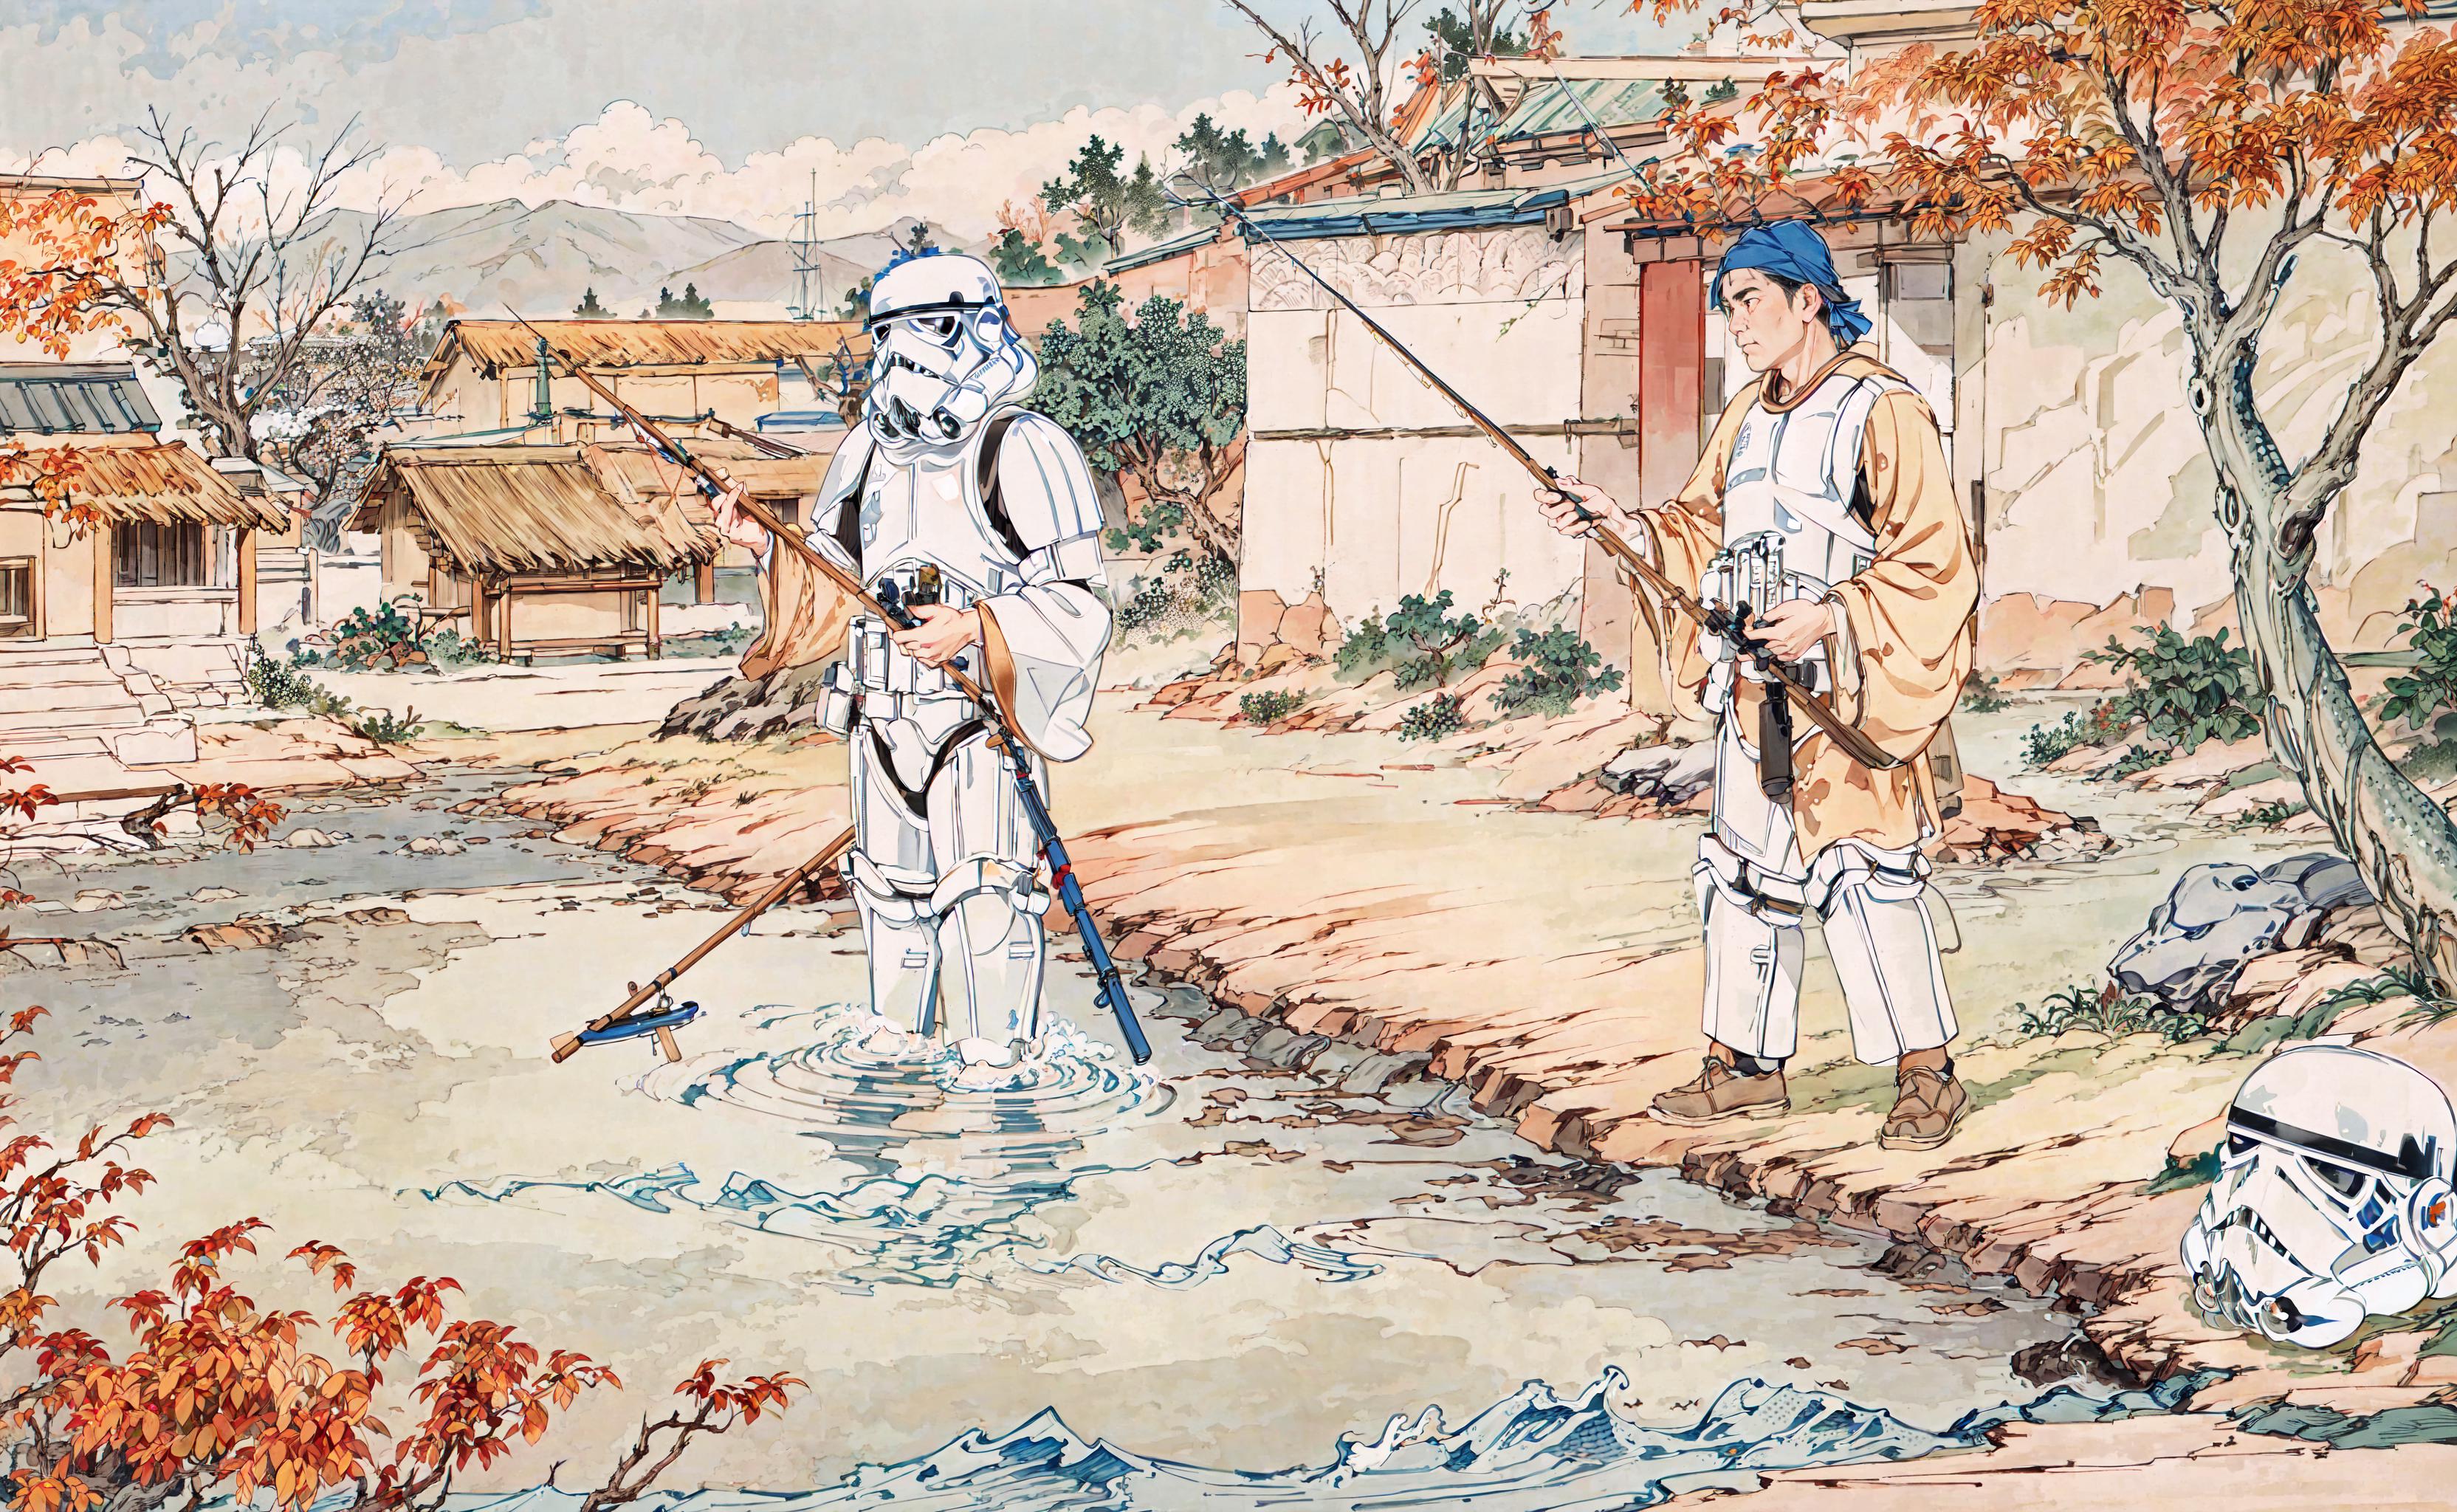 A painting of two stormtroopers fishing in a river.